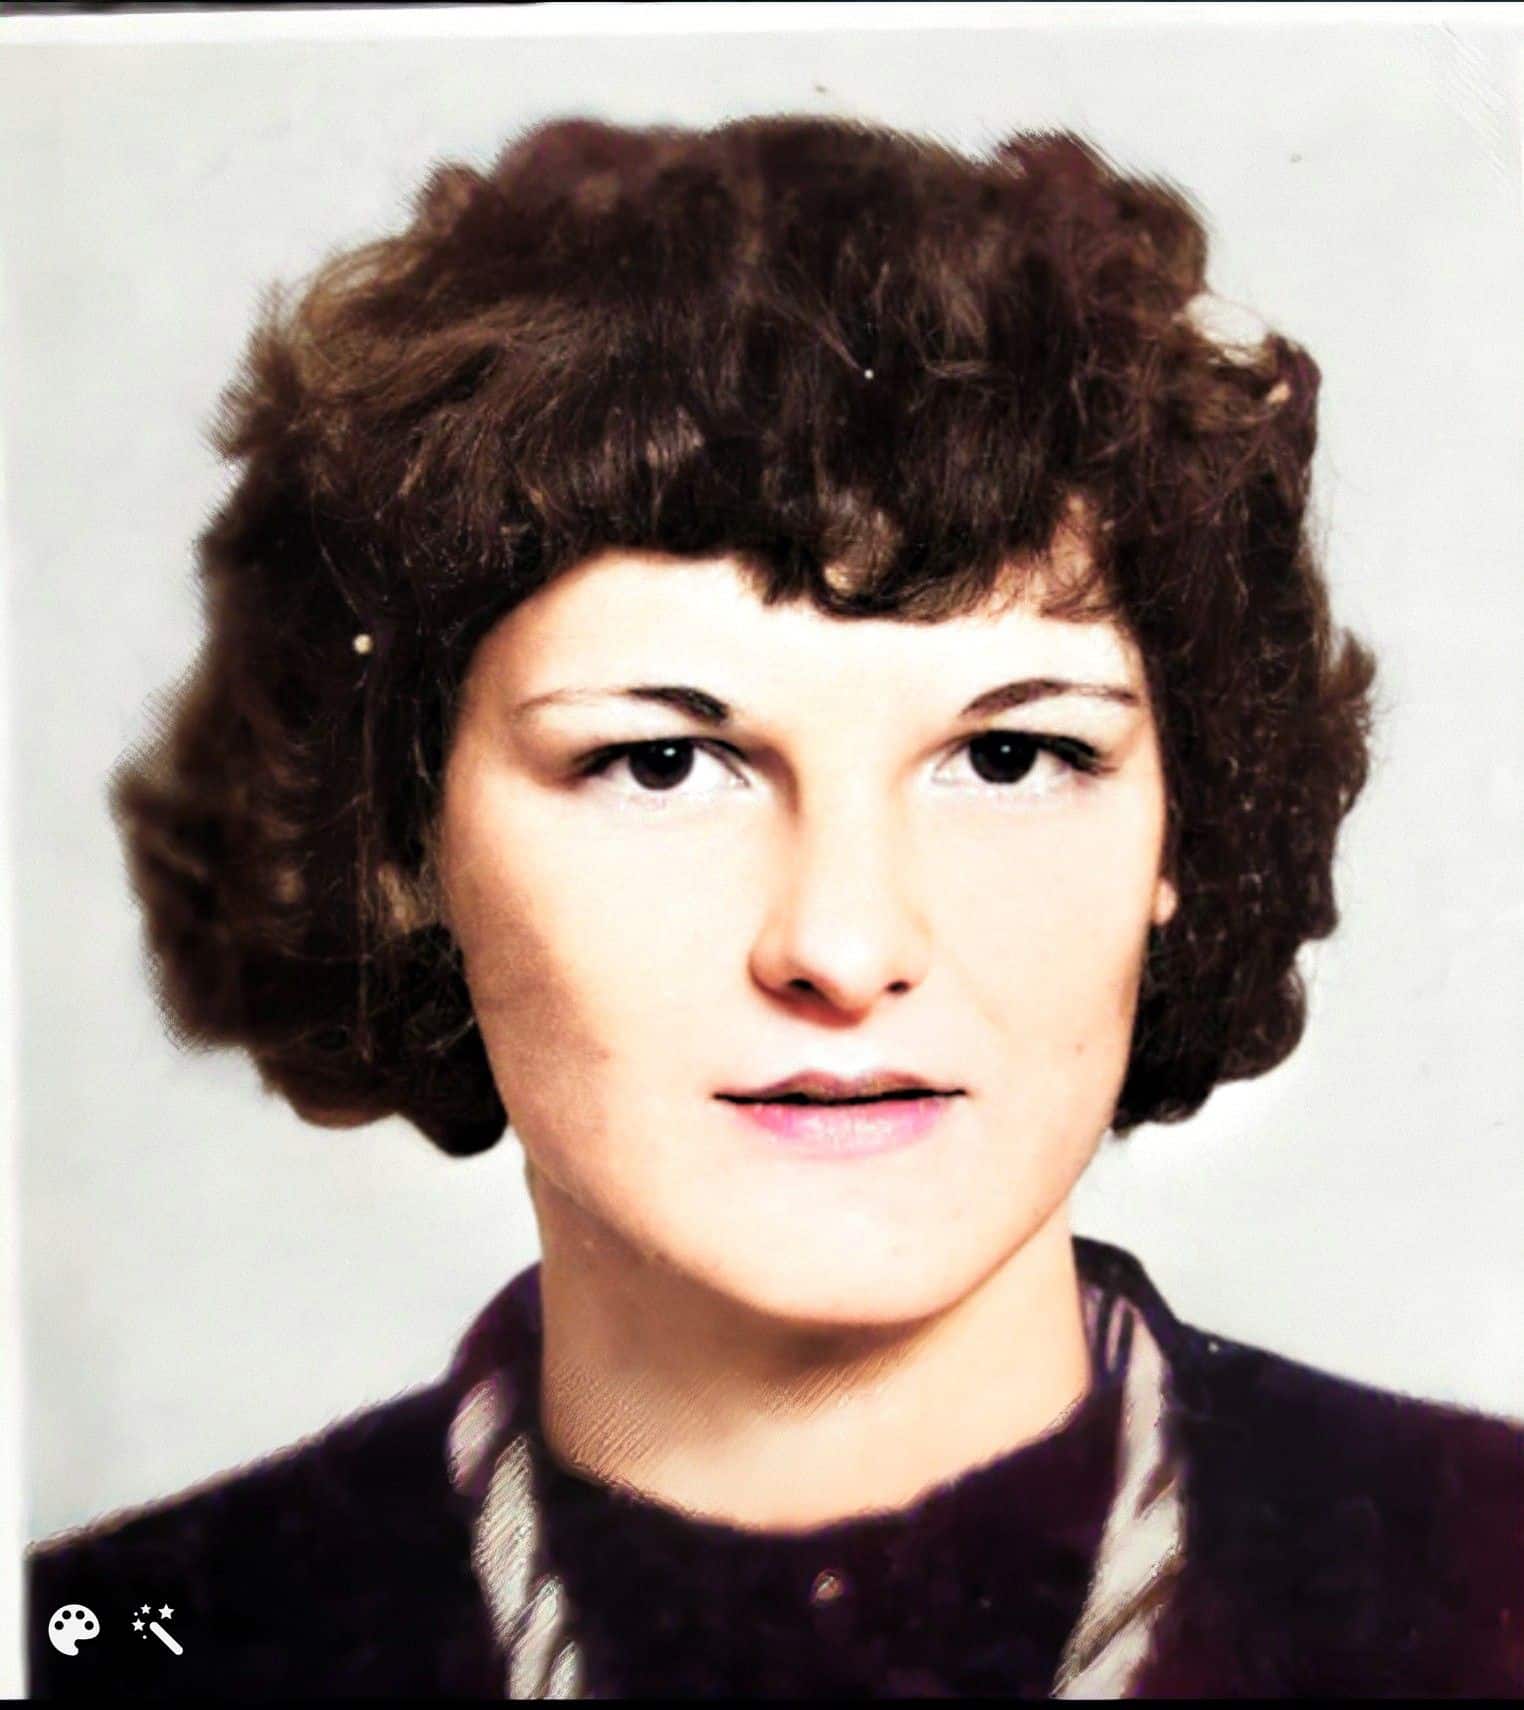 Susan's mother. Photo enhanced, repaired, and colorized by MyHeritage